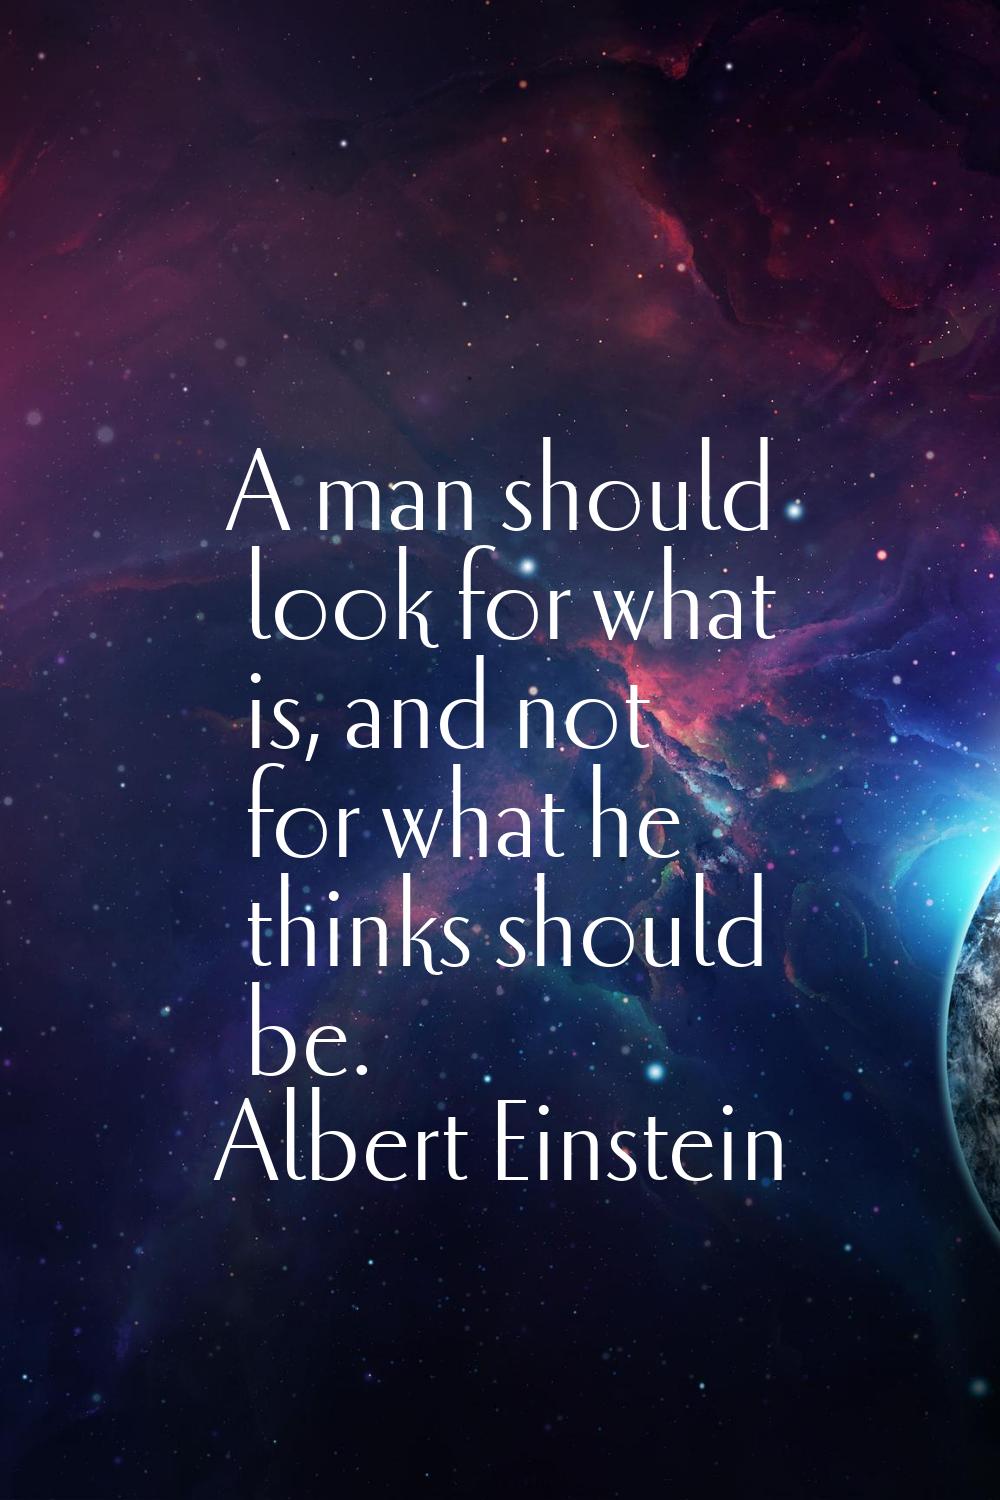 A man should look for what is, and not for what he thinks should be.